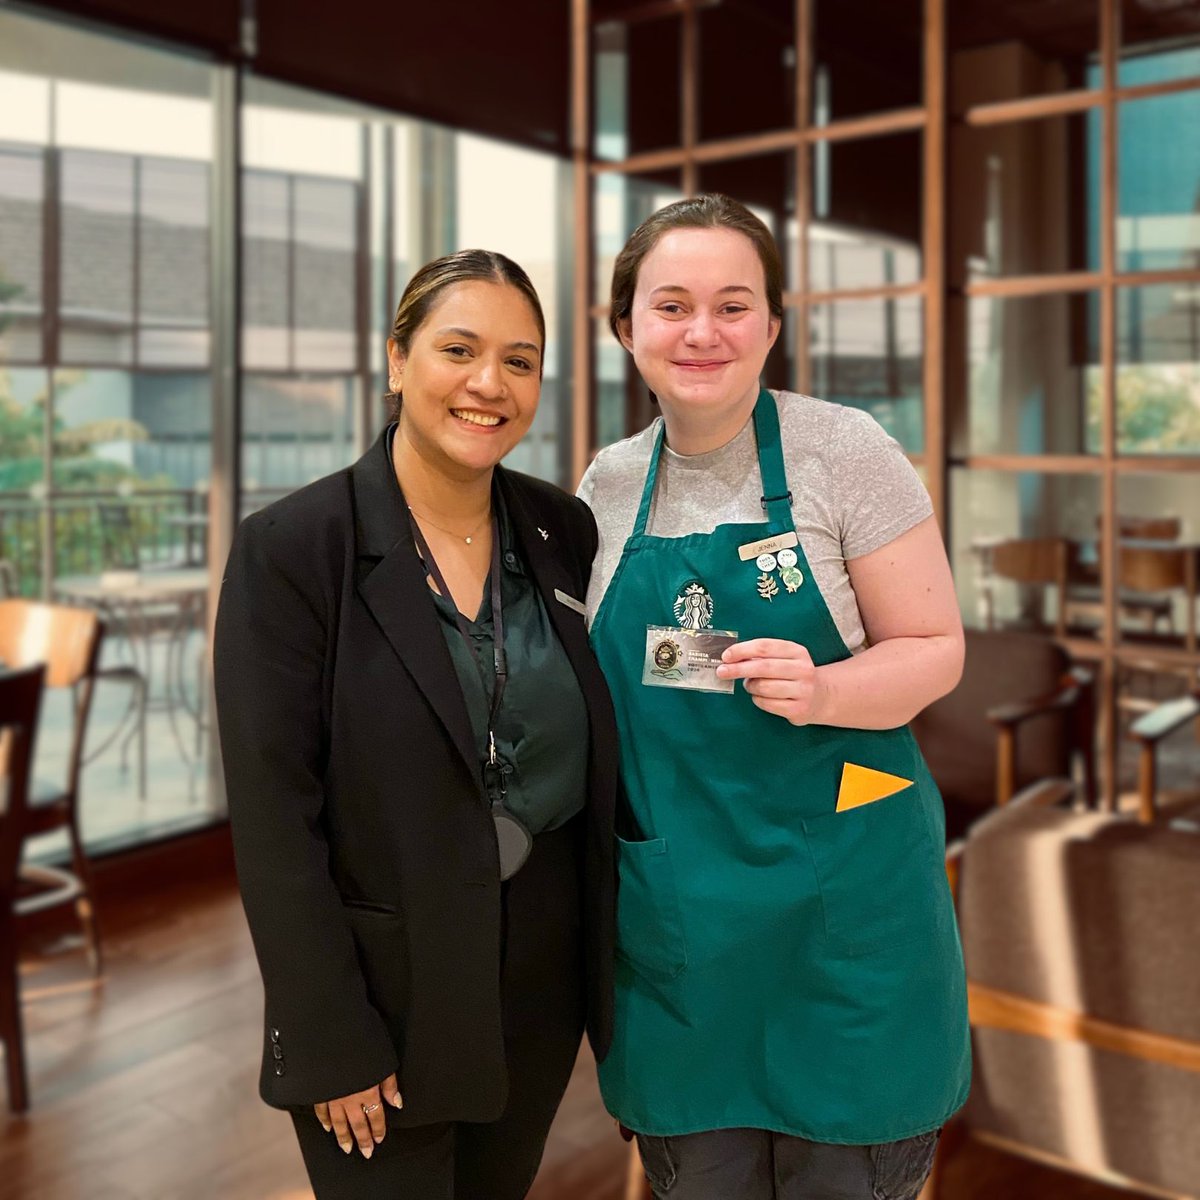 We congratulate Jenna on becoming the Starbucks District Barista Champion! Jenna now advances to the Area Barista Competition later this month, representing the talent and hospitality that define the Ottawa Marriott's luxury experience. #starbucks #areabaristacompetition